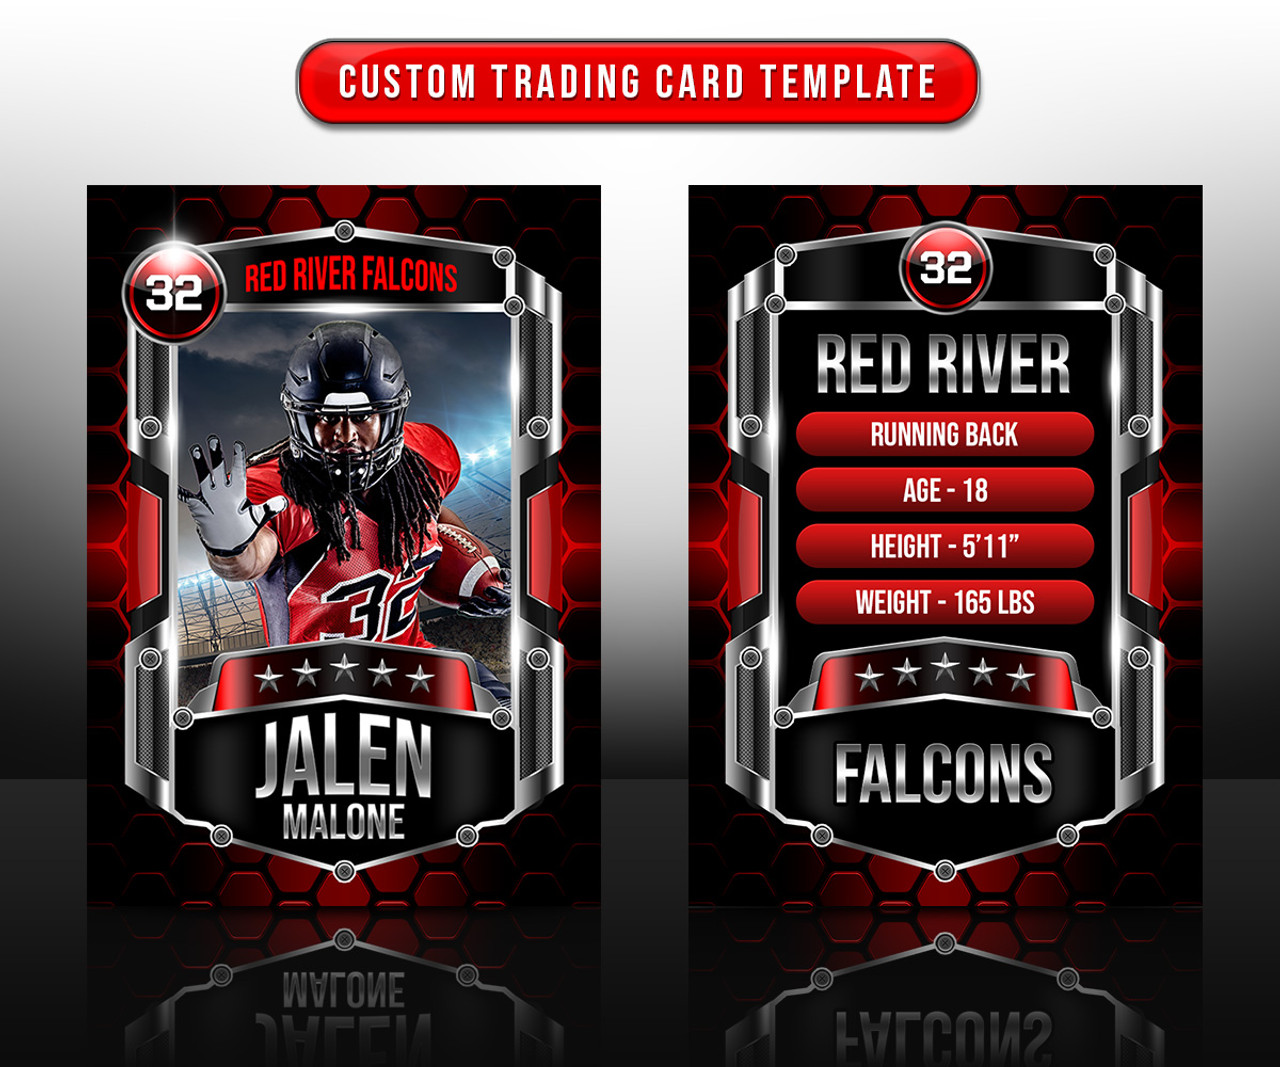 SPORTS TRADING CARDS AND 5X7 TEMPLATE - HEXAGON III